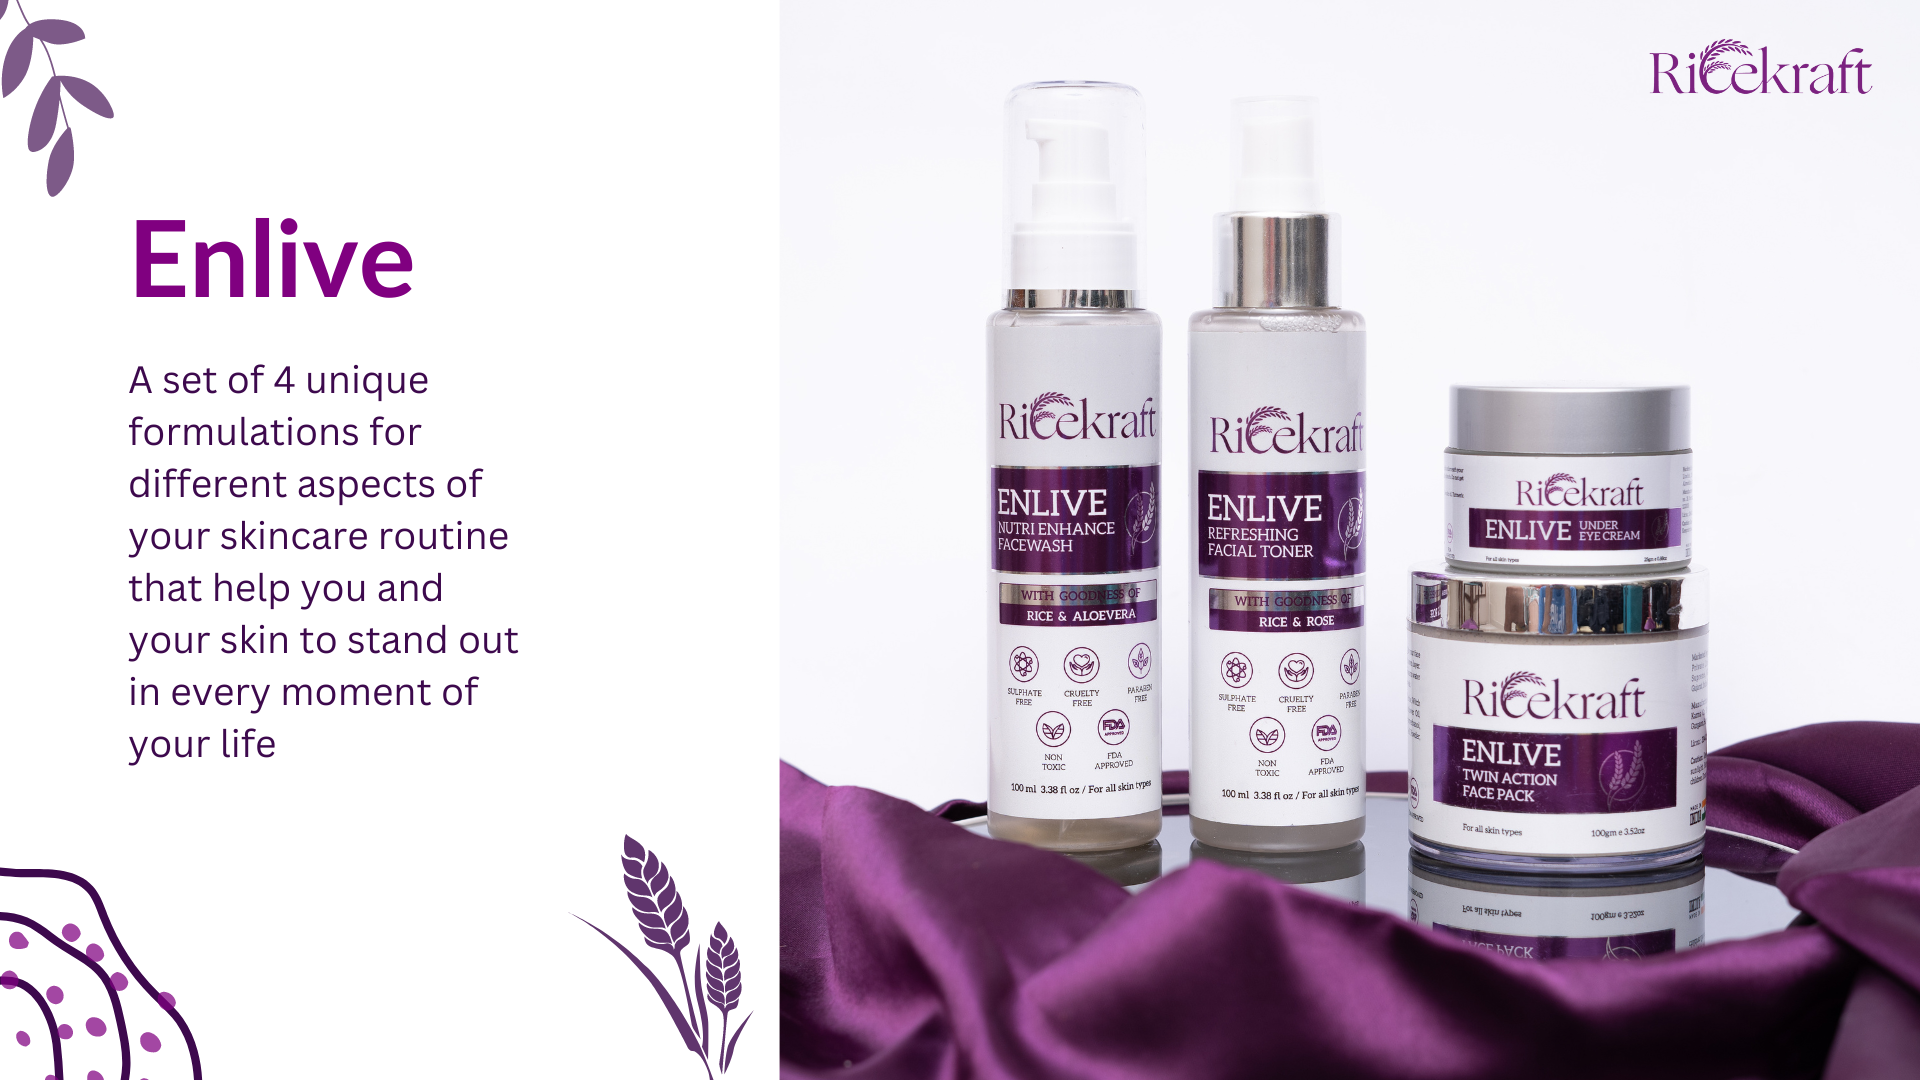 Ricekraft Enlive Pack, A set of 4 unique formulations for different aspects of your skincare routine that help you and your skin to stand out in every moment of your life